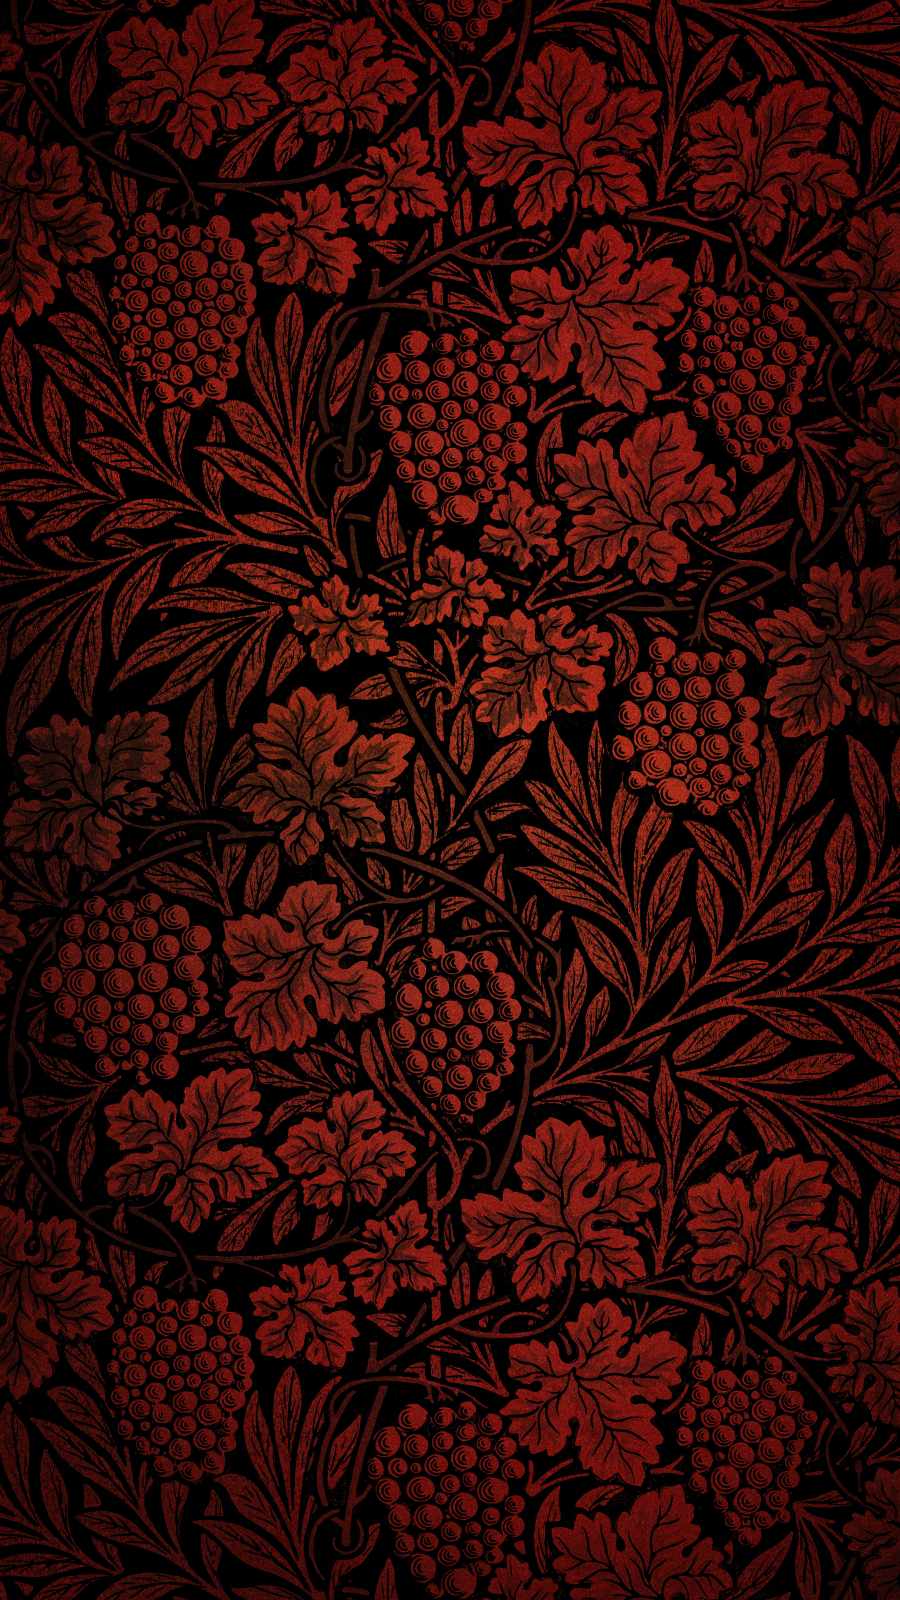 Red Foliage Design IPhone Wallpaper - IPhone Wallpapers : iPhone Wallpapers